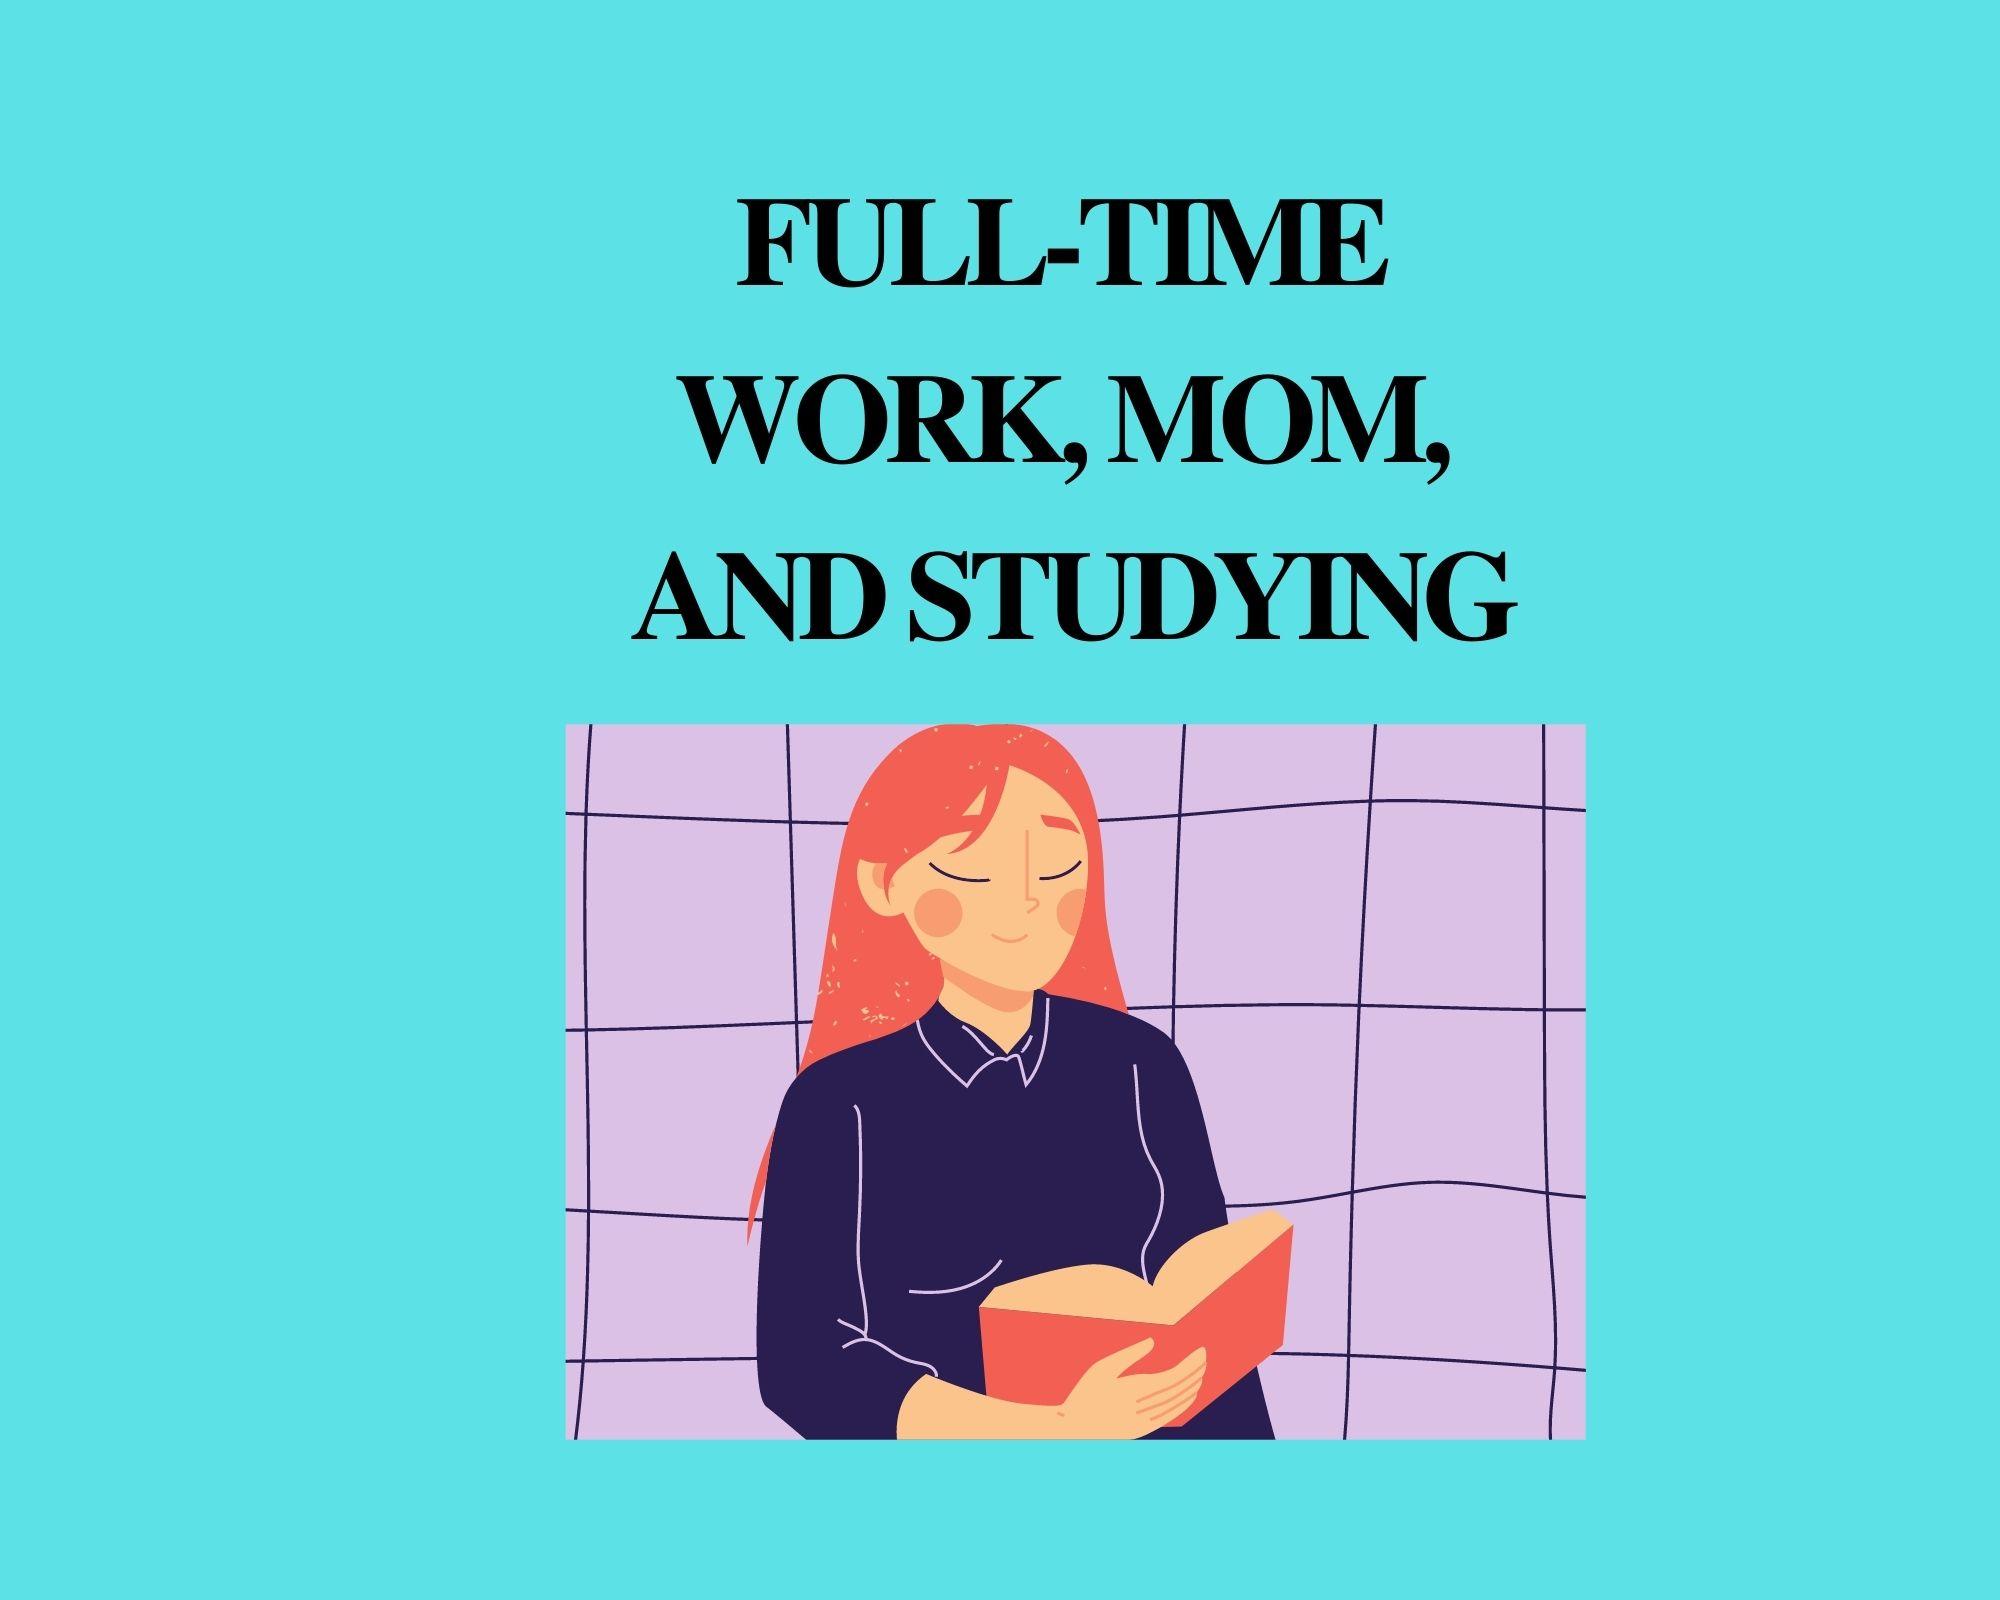 5 Guaranteed Secrets to Balance Being Mom, Working & Study (No Burnout)